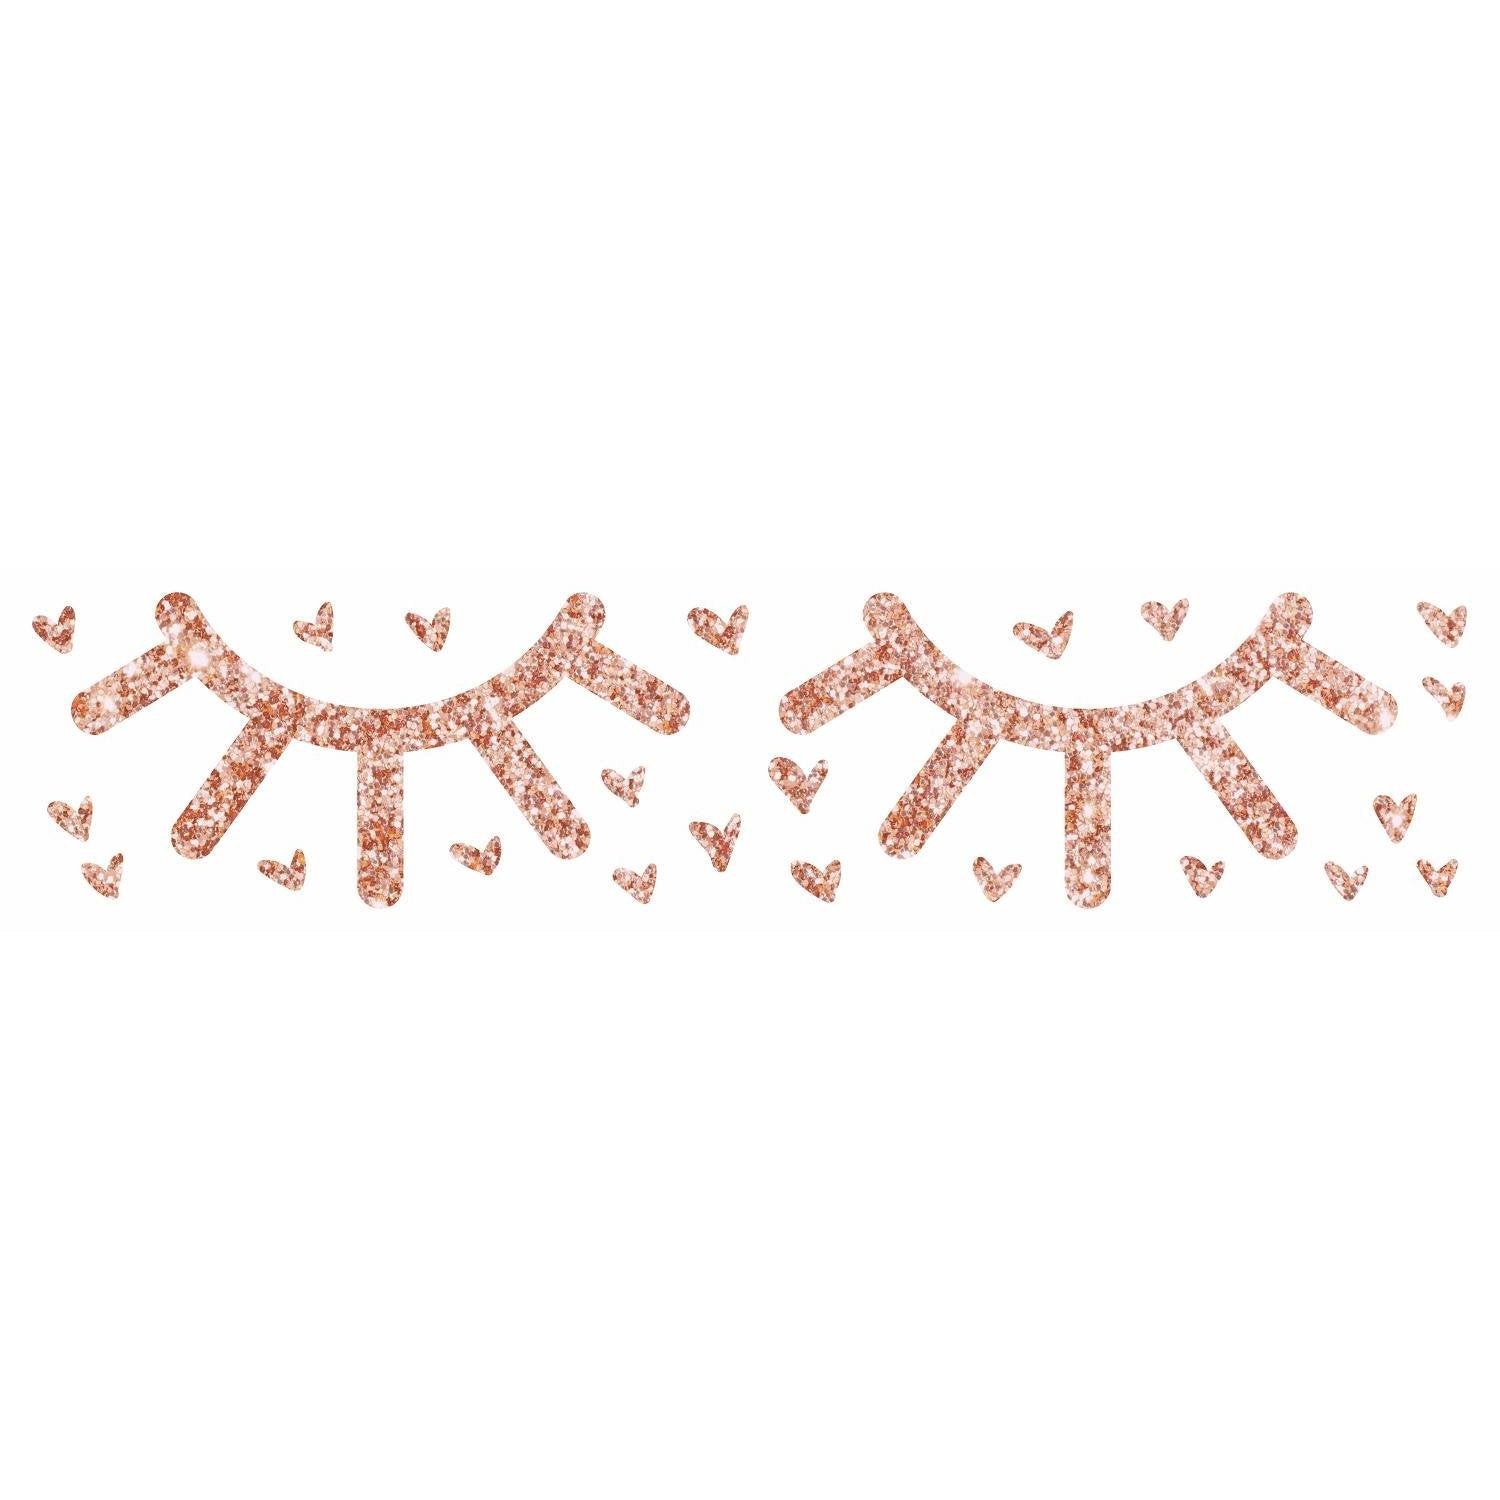 RoomMates Eyelash Peel and Stick Wall Decals With Glitter - Snug as a Bug